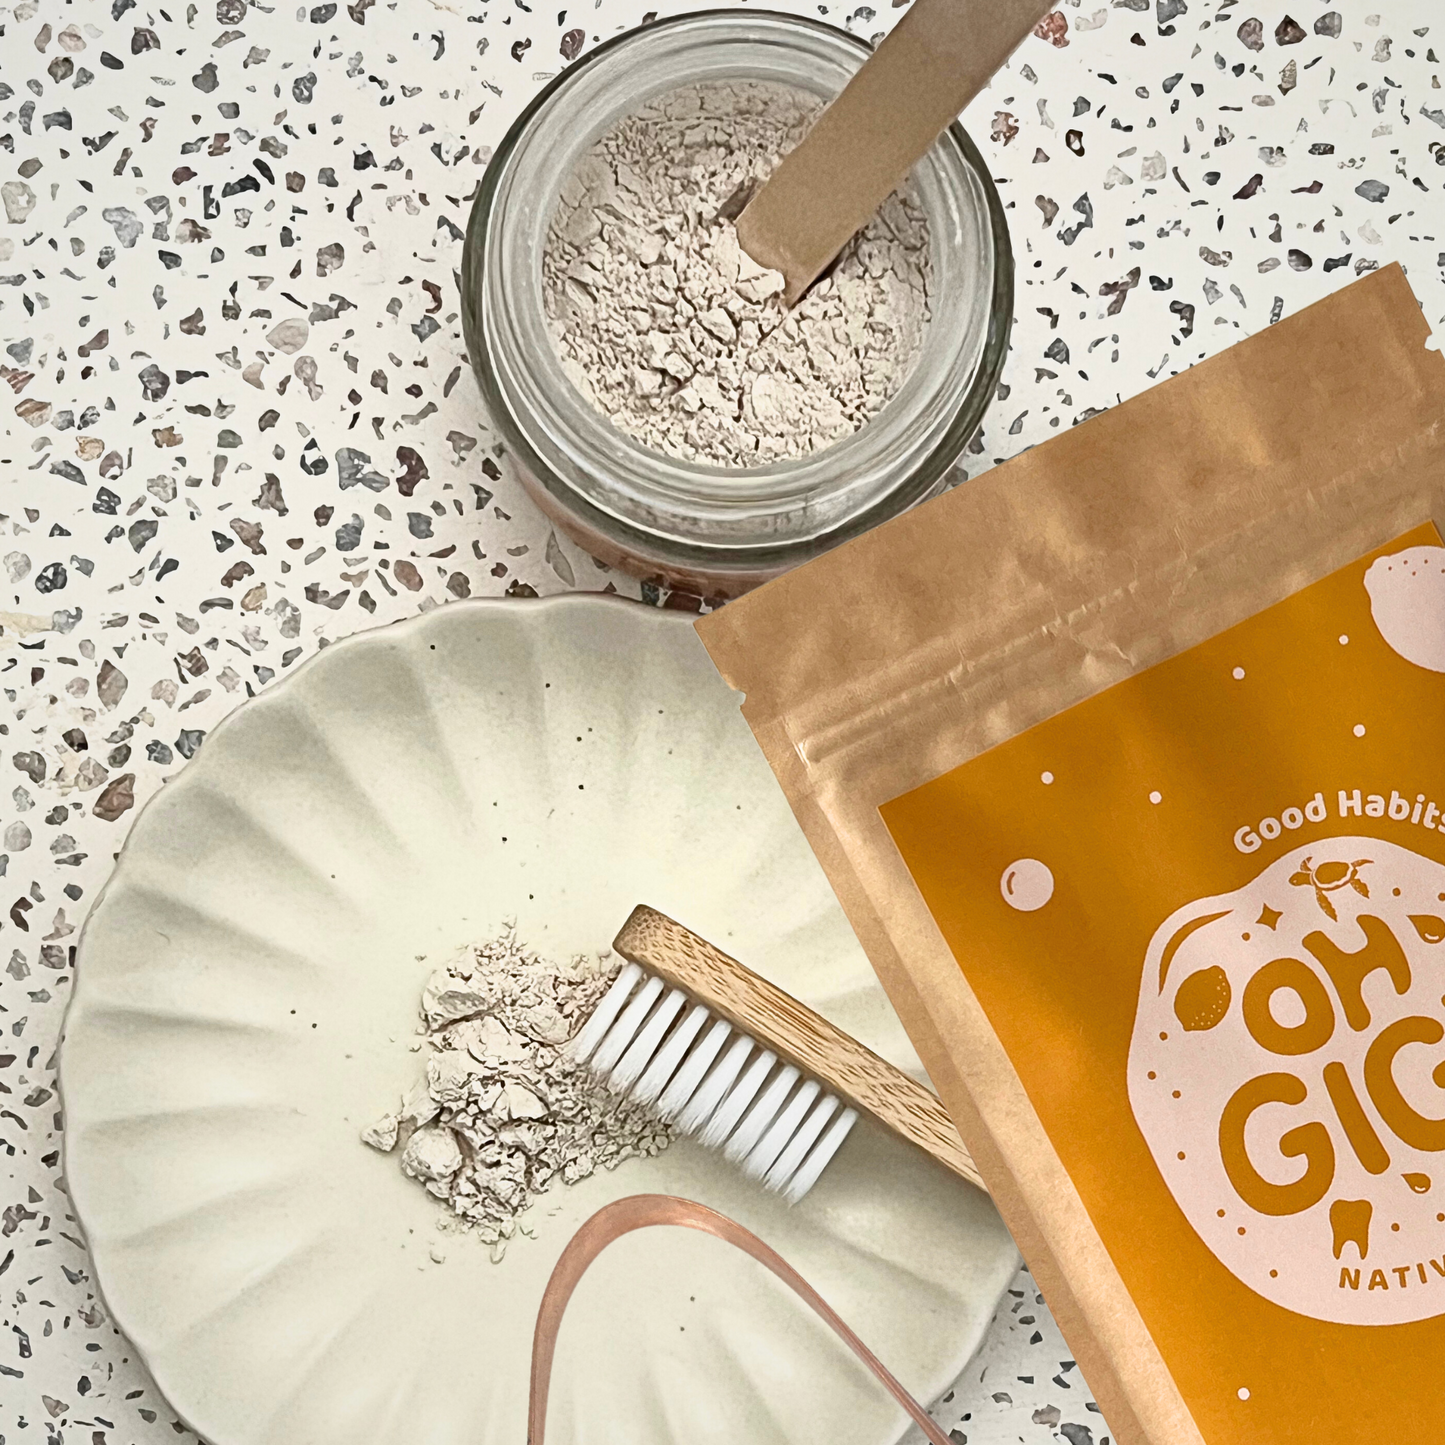 Ultimate Organic Tooth Powder 'Native Brush + Hydroxyapatite' Jar & Refill with a Pure Copper Tongue Cleaner Oral Detox Kit